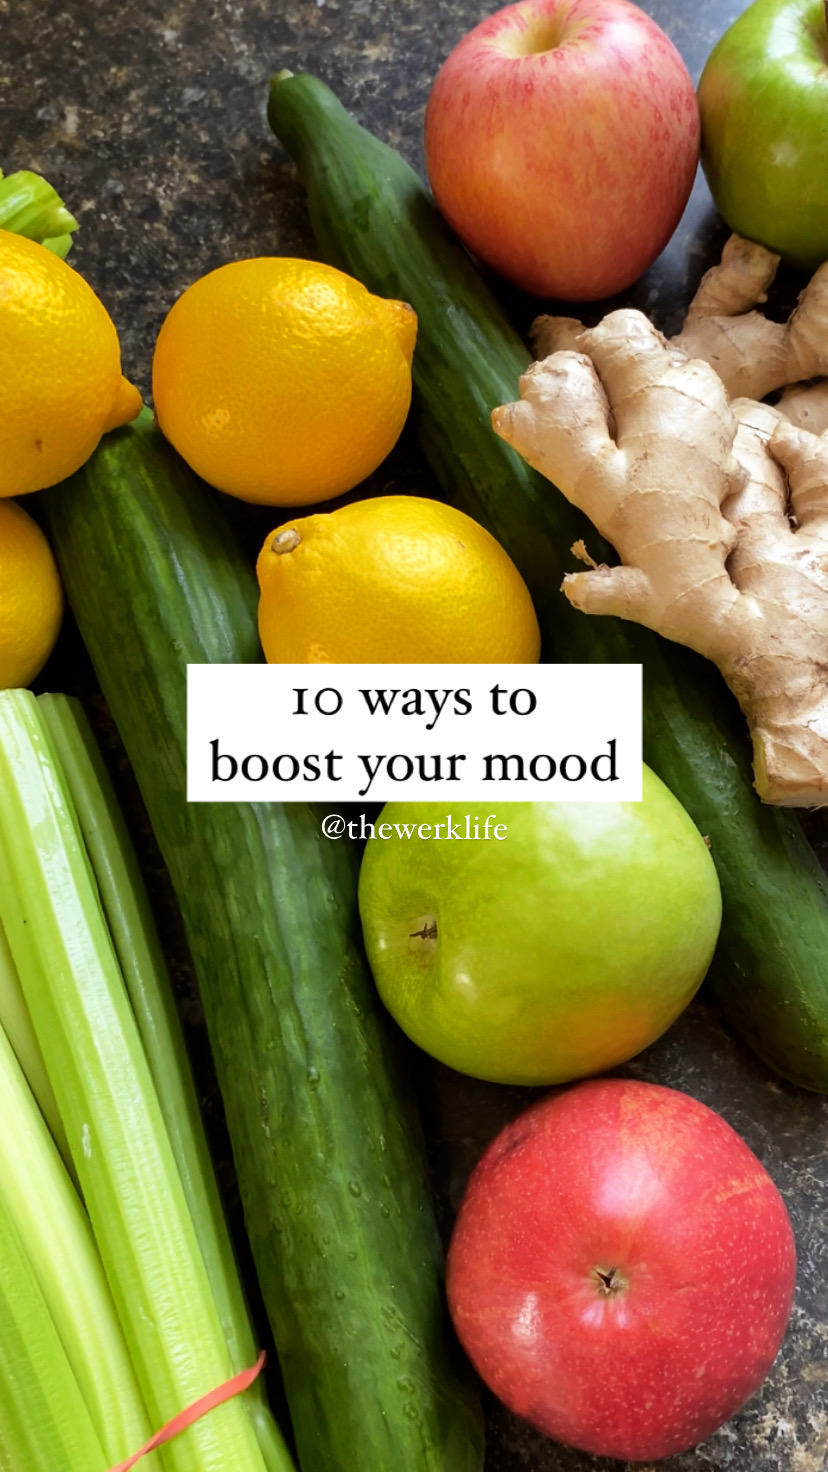 10 ways to boost your mood